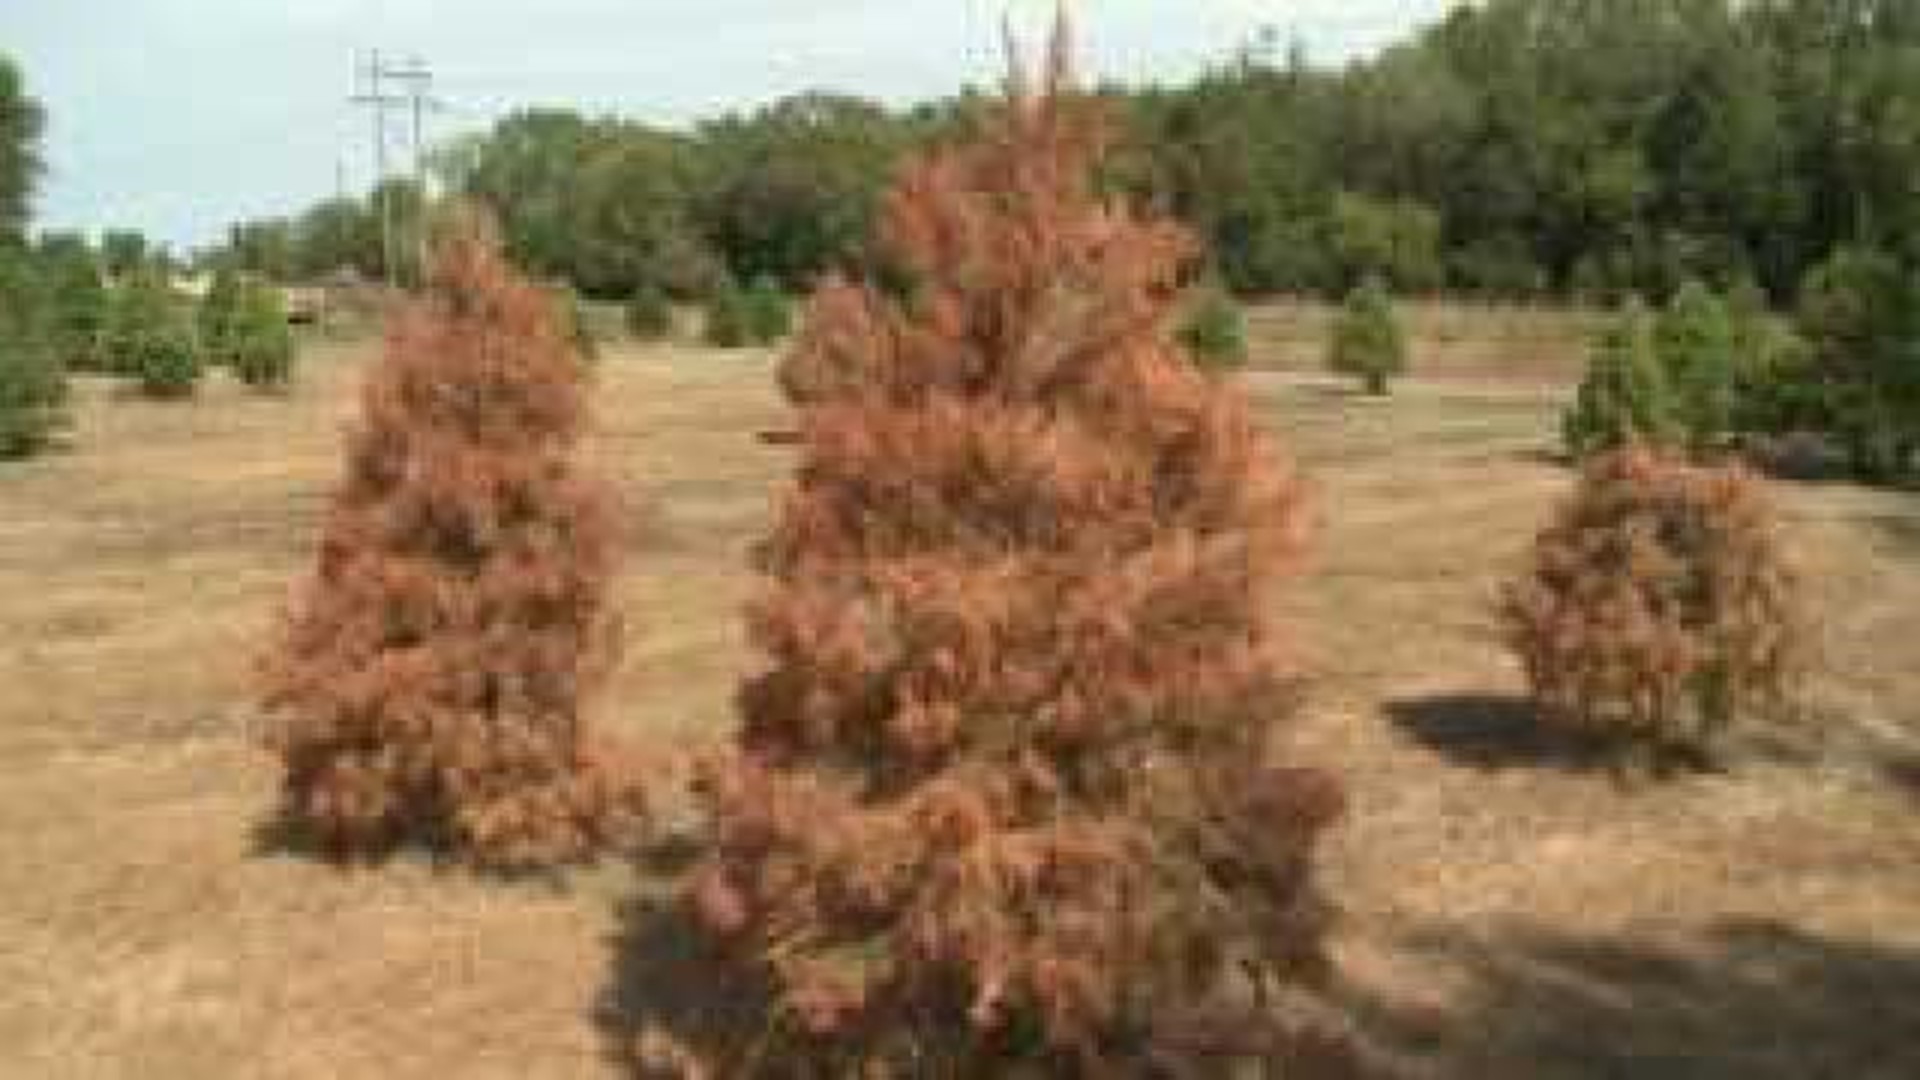 Christmas trees and drought